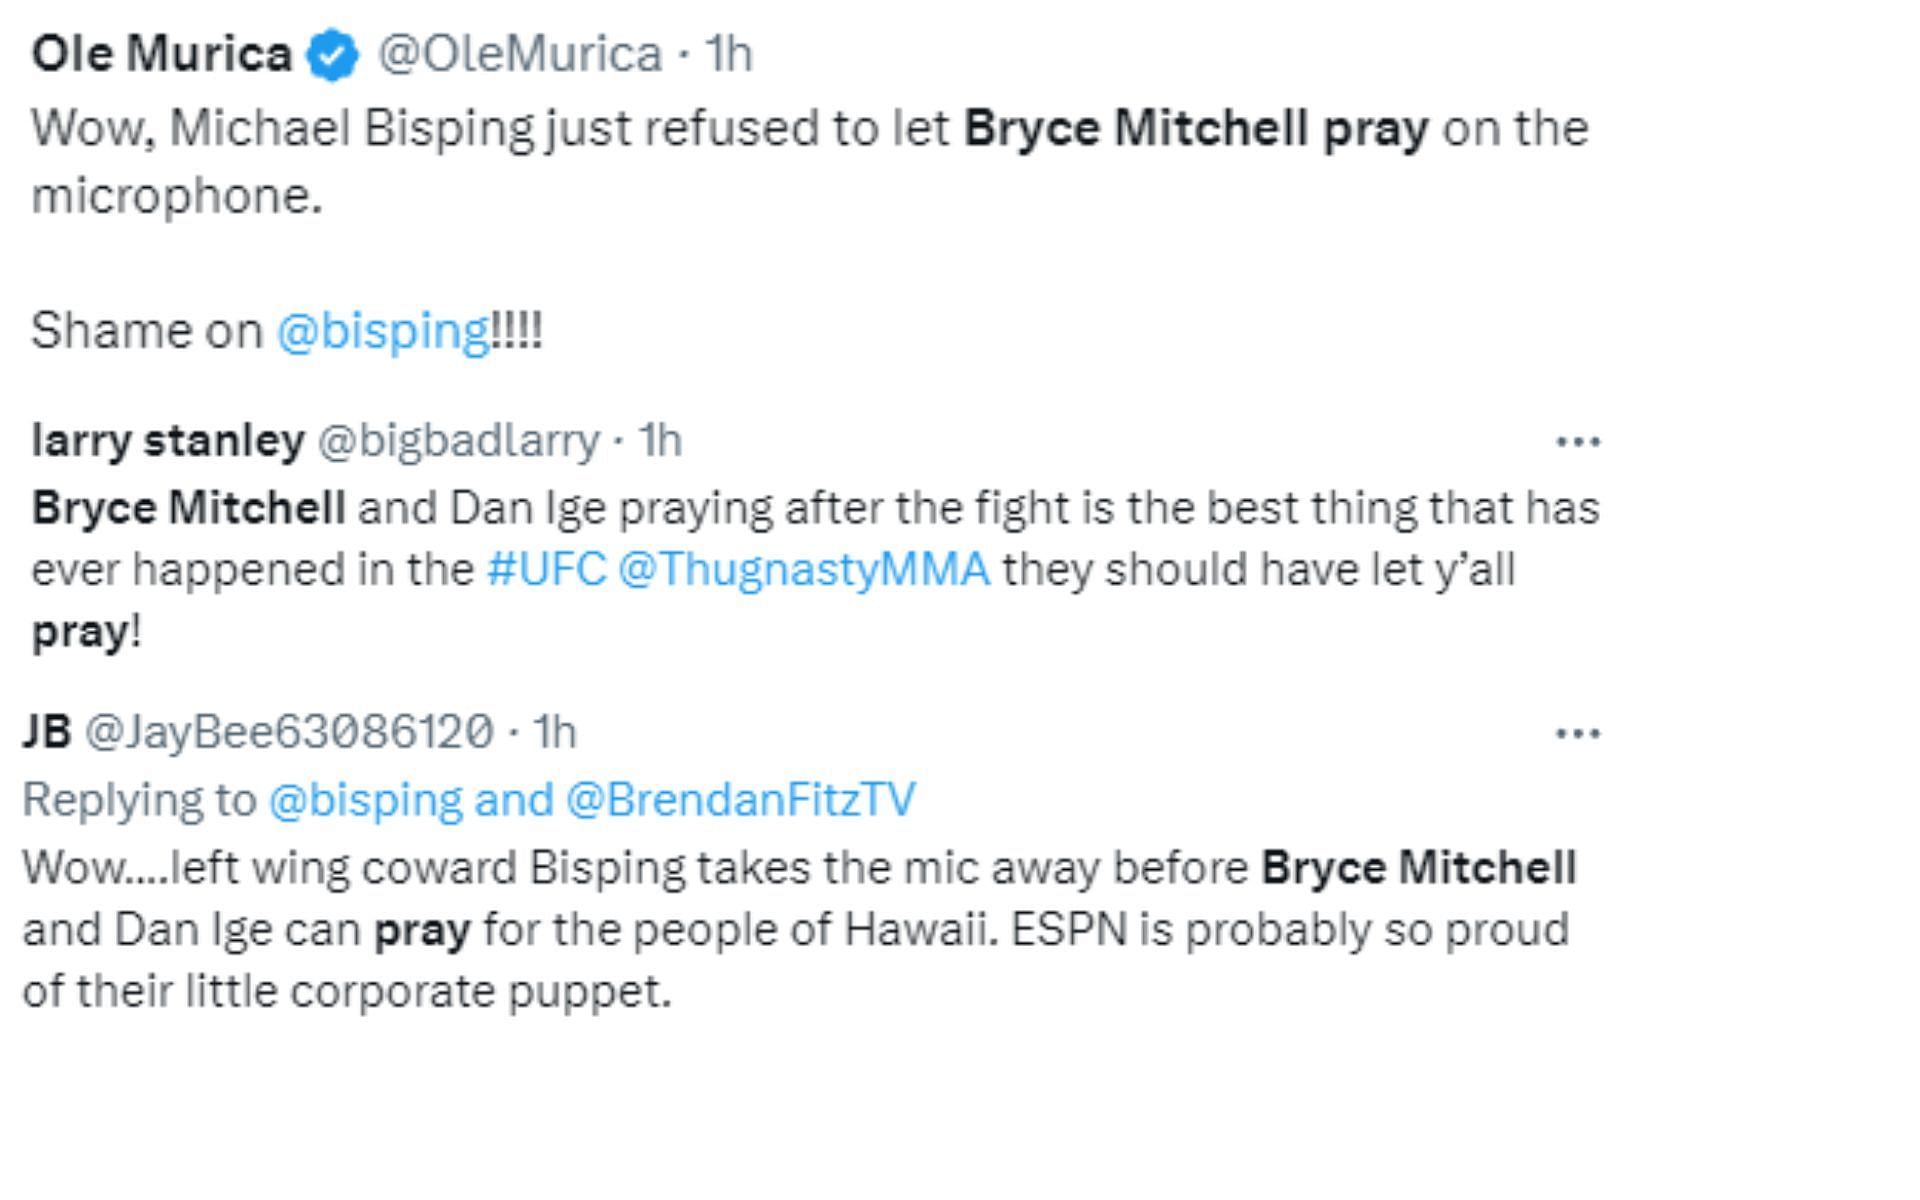 More fan reactions to Bryce Mitchell being denied to pray